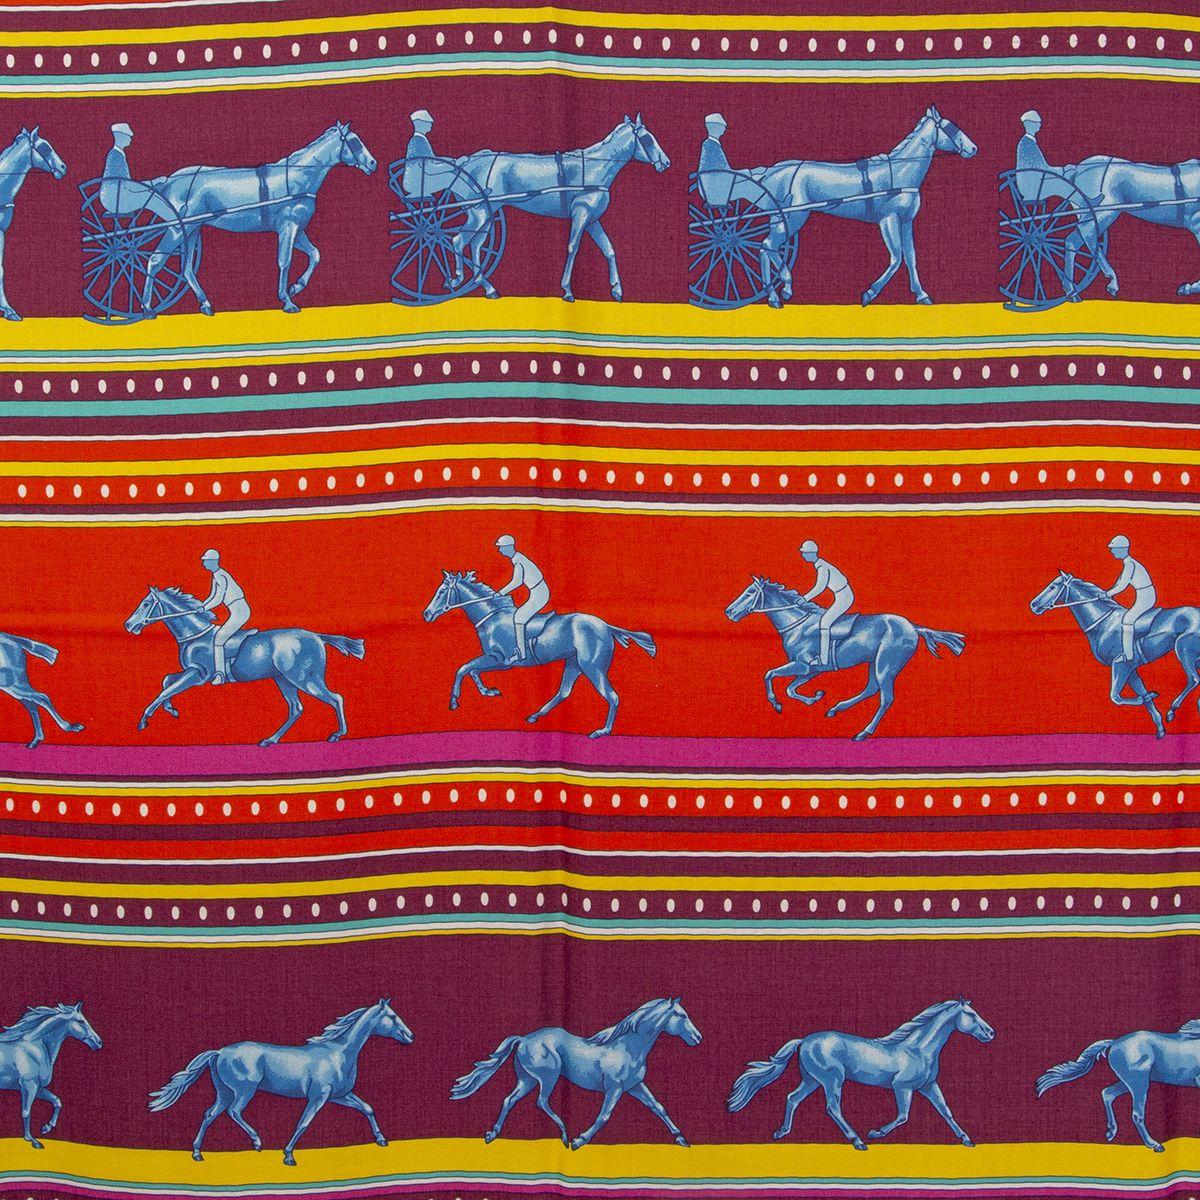 Hermes 'Sequences 140' scarf by Caty Latham in red cashmere silk twill (100%) with contrast white hem and details in burgundy, yellow and red. Brand new - please note the store tag list the wrong colorway.

Width 140cm (55in)
Height 140cm (55in)